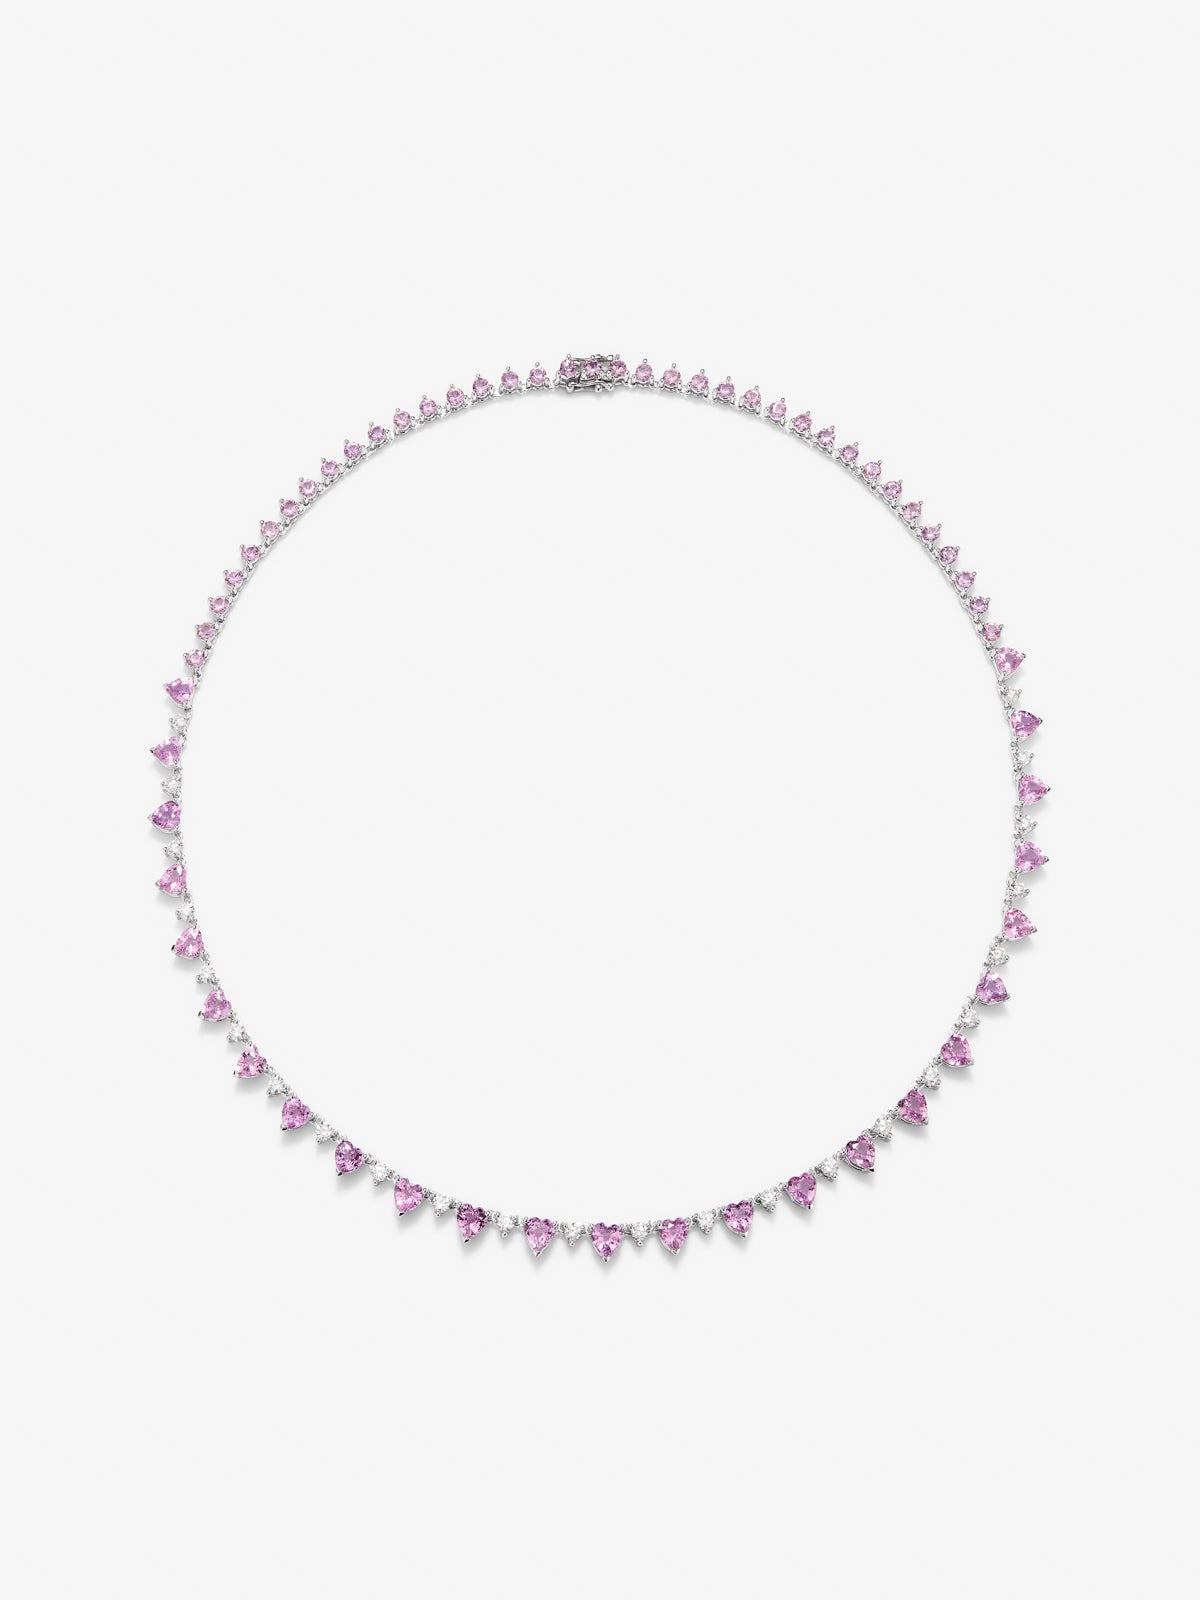 18K white gold necklace with 25 heart-cut pink sapphires with a total of 10.59 cts, 37 brilliant-cut diamonds with a total of 4.72 cts and 24 brilliant-cut diamonds with a total of 1.51 cts